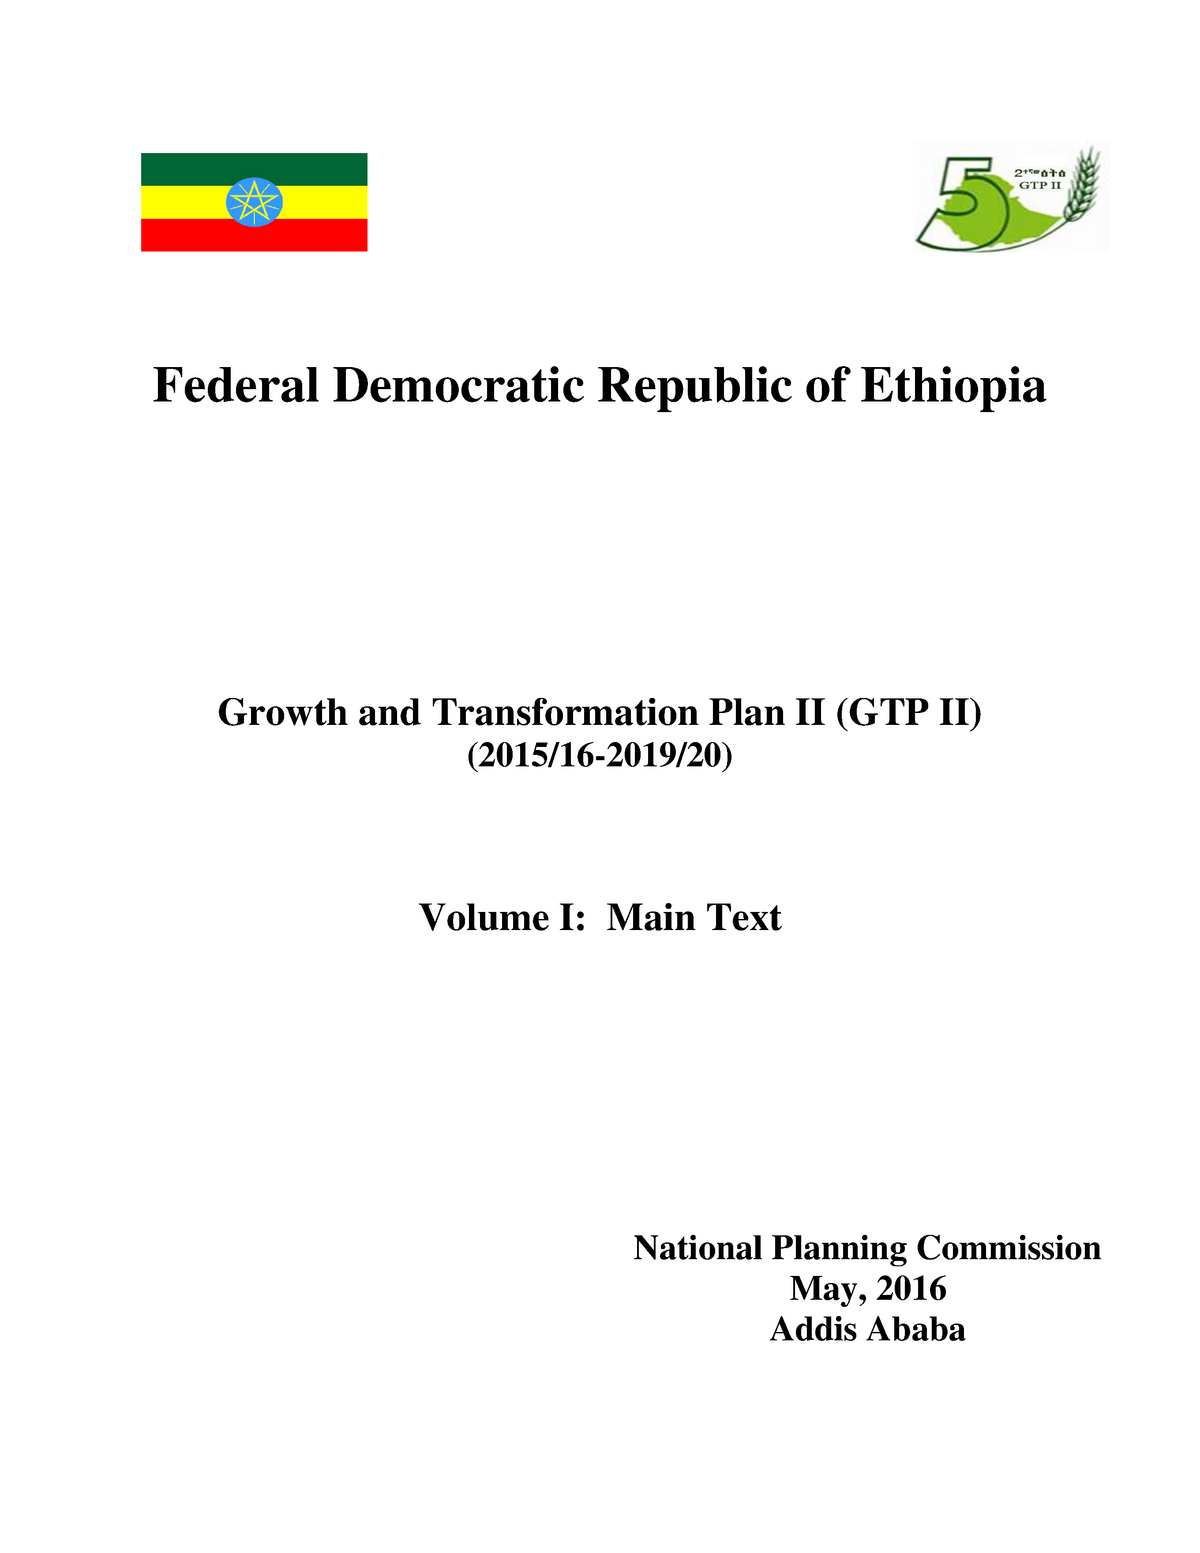 completed business plan in ethiopia pdf